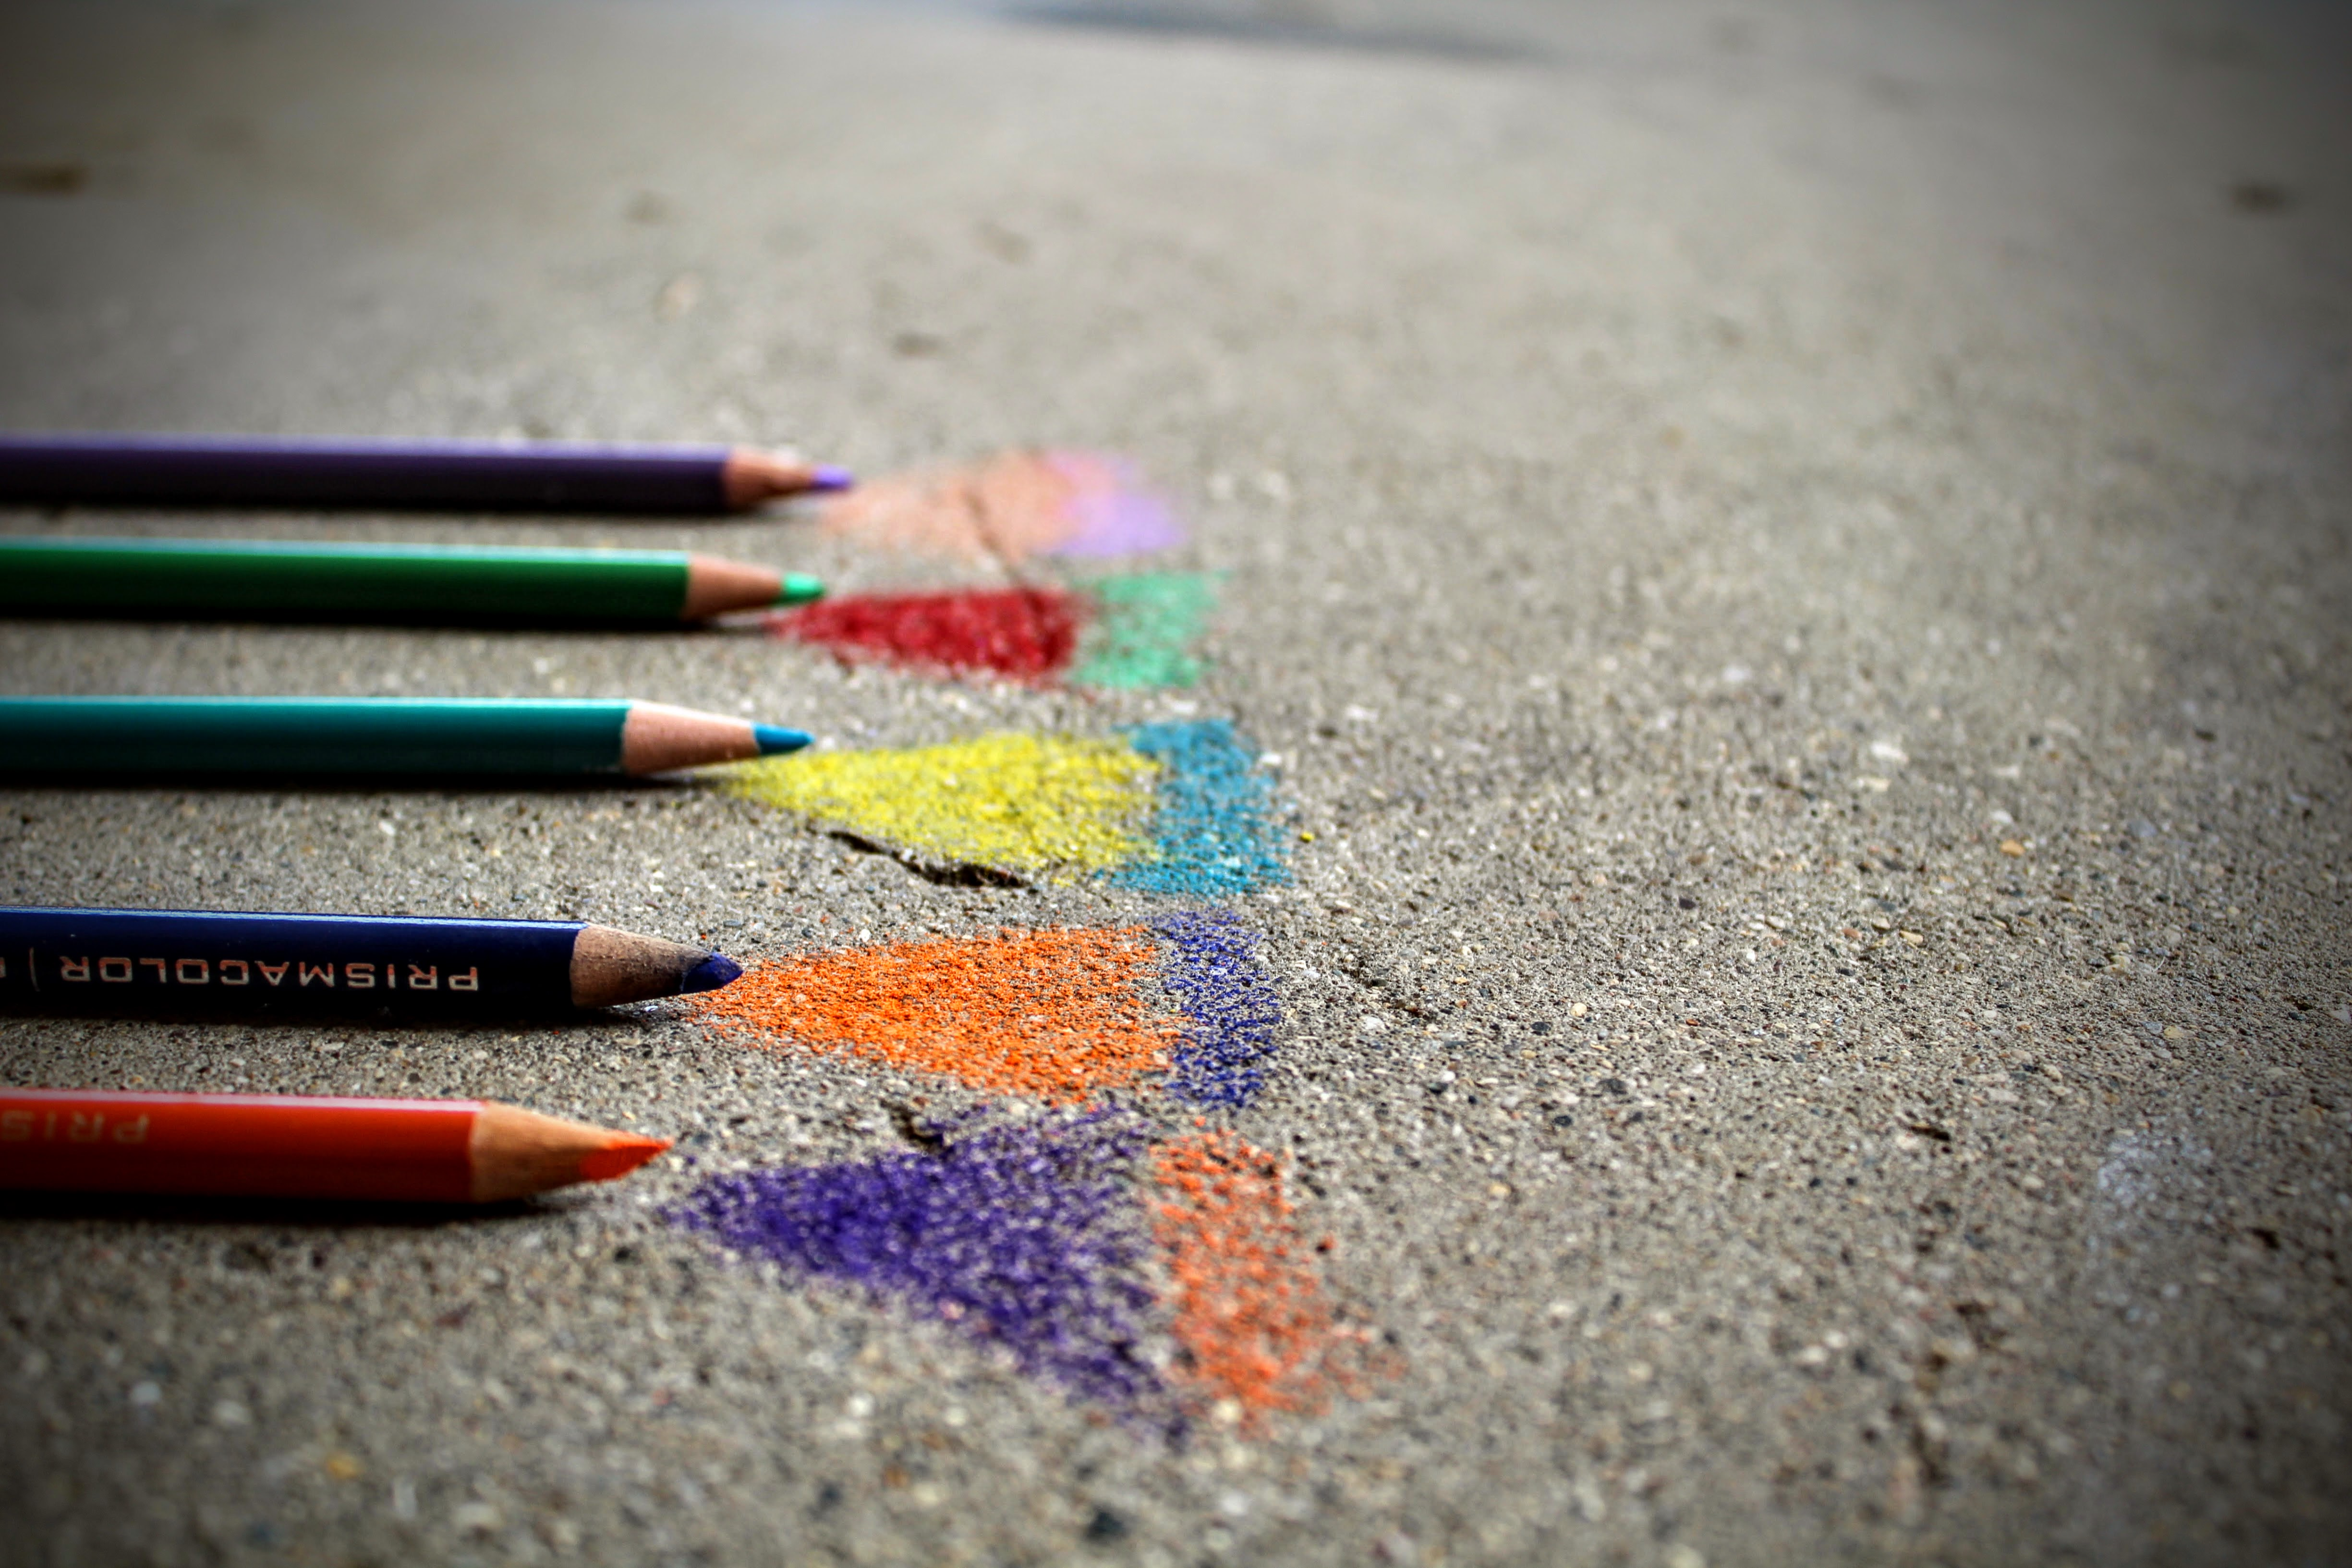 Colored pencils on sidewalk with various colored triangles